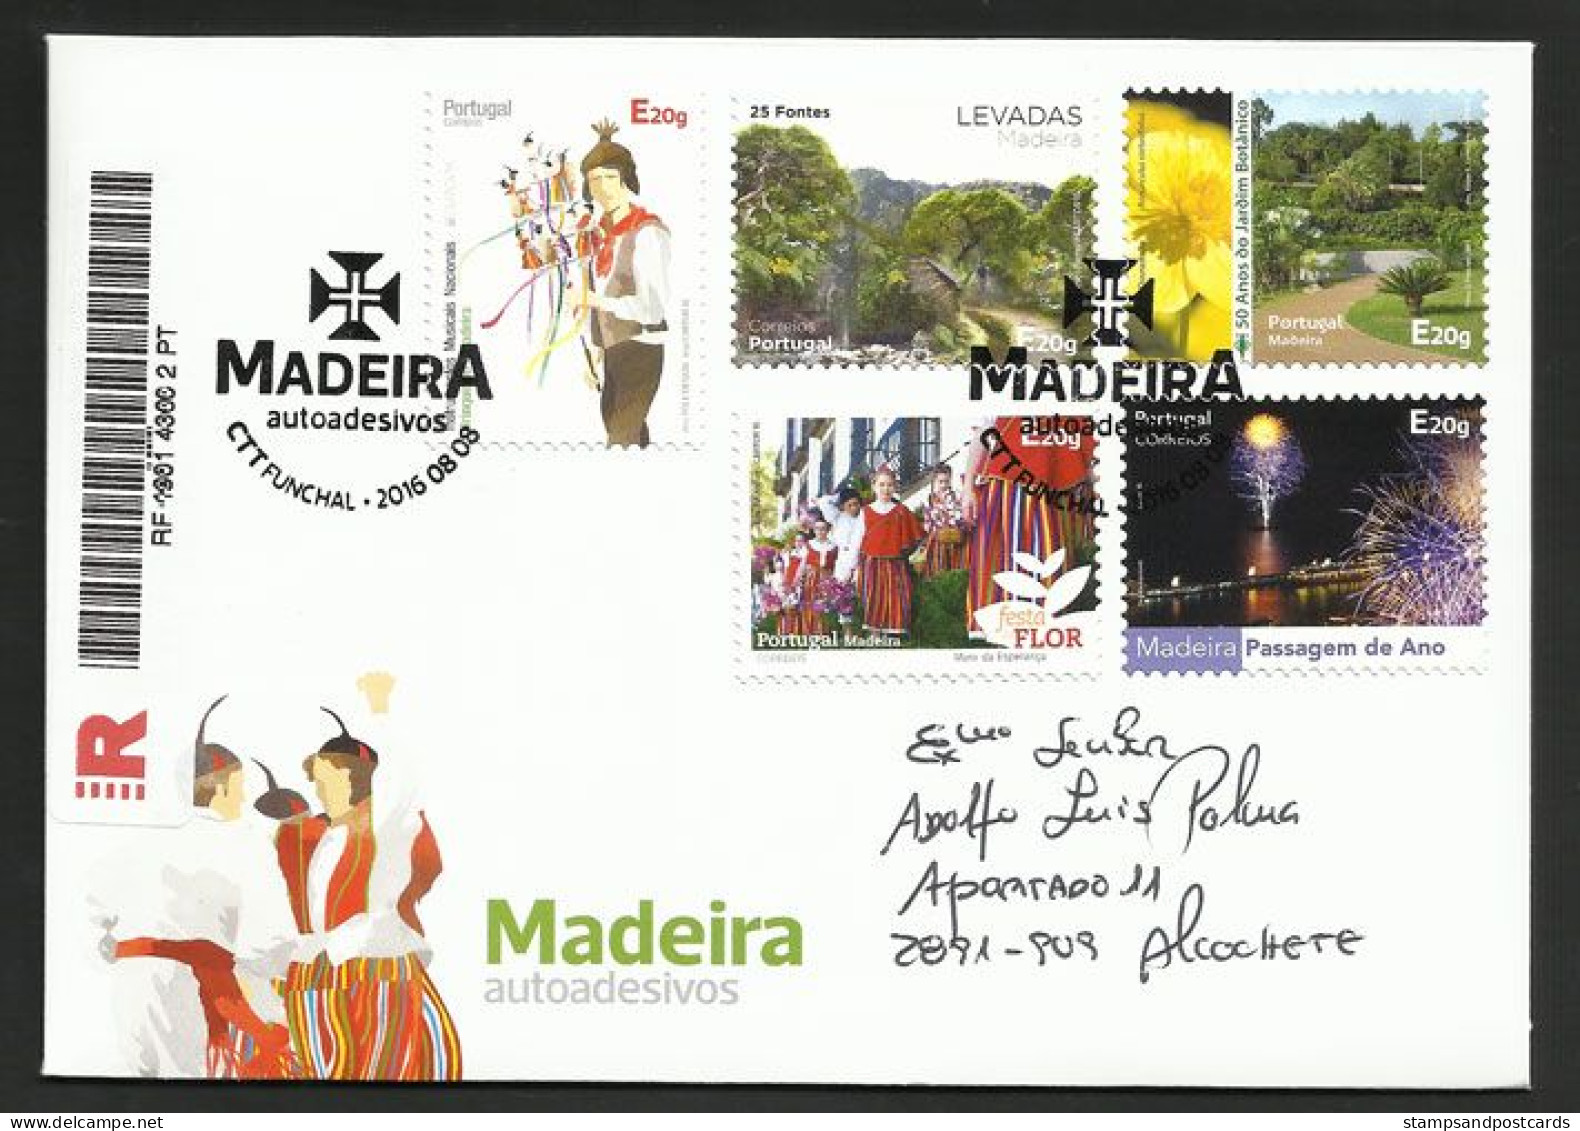 Portugal Madère Timbres Autocollant 2016 Reprend Europa CEPT 2014 FDC R Instruments Musique Madeira Sticker Stamps - 2014